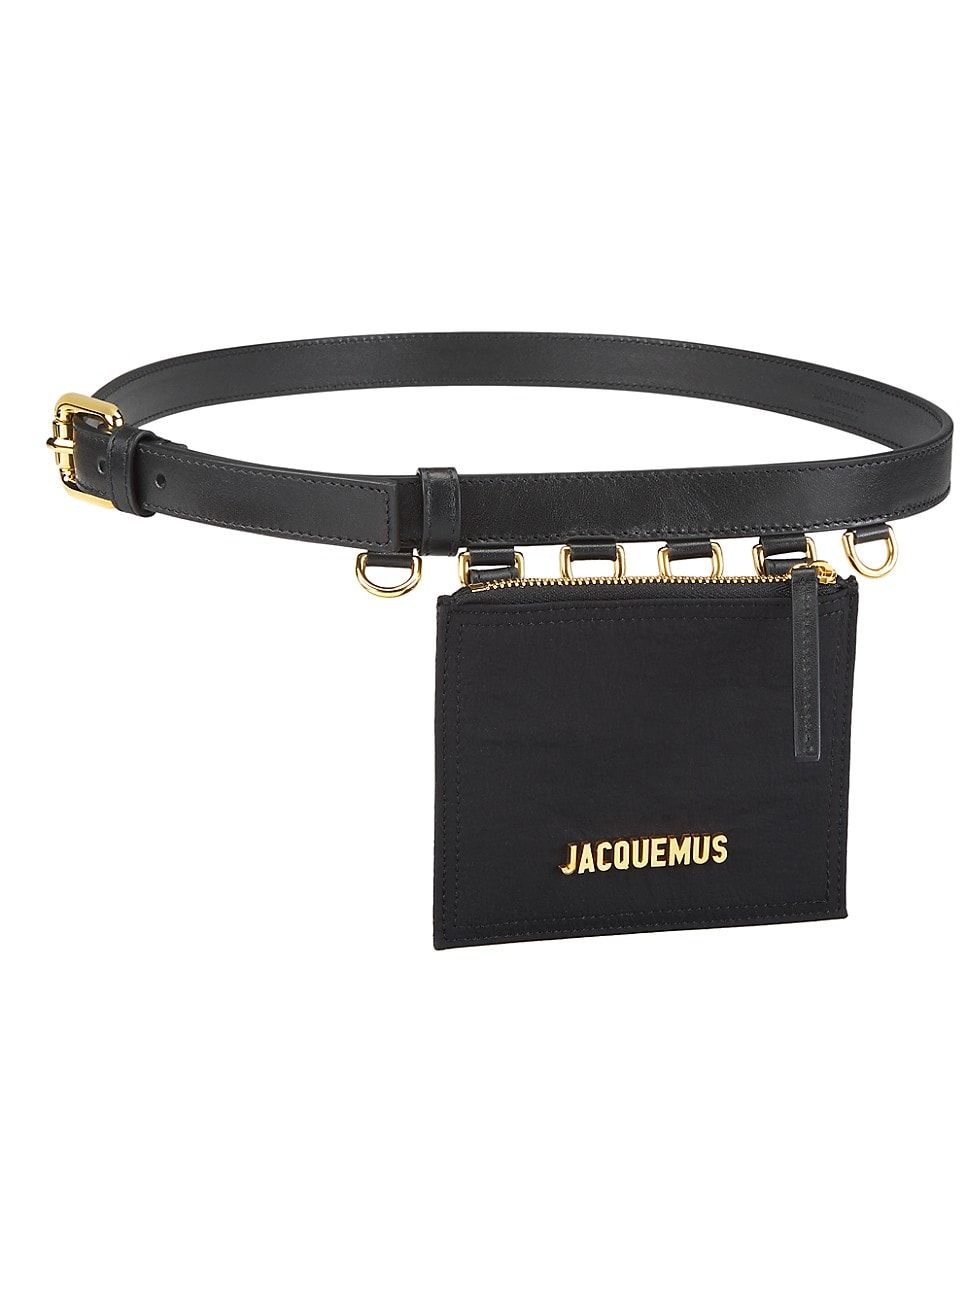 <p><strong>$445.00</strong></p><p>A modern interpretation of the fanny pack, Jacquemus' La Ceinture belt features a small, wallet-like zip pouch that fits both credit cards and cash comfortably. Weave it into your belt loops on a pair of jeans or a trouser pant for a cool, downtown look that's beyond practical. While the classic black option is sleek, the bubble gum pink is a great option if you're feeling more whimsical. </p><p><strong>Size: </strong>35.5" Length </p><p><strong>Material: </strong>Leather </p><p><strong>Color:</strong> Black, Pink </p>